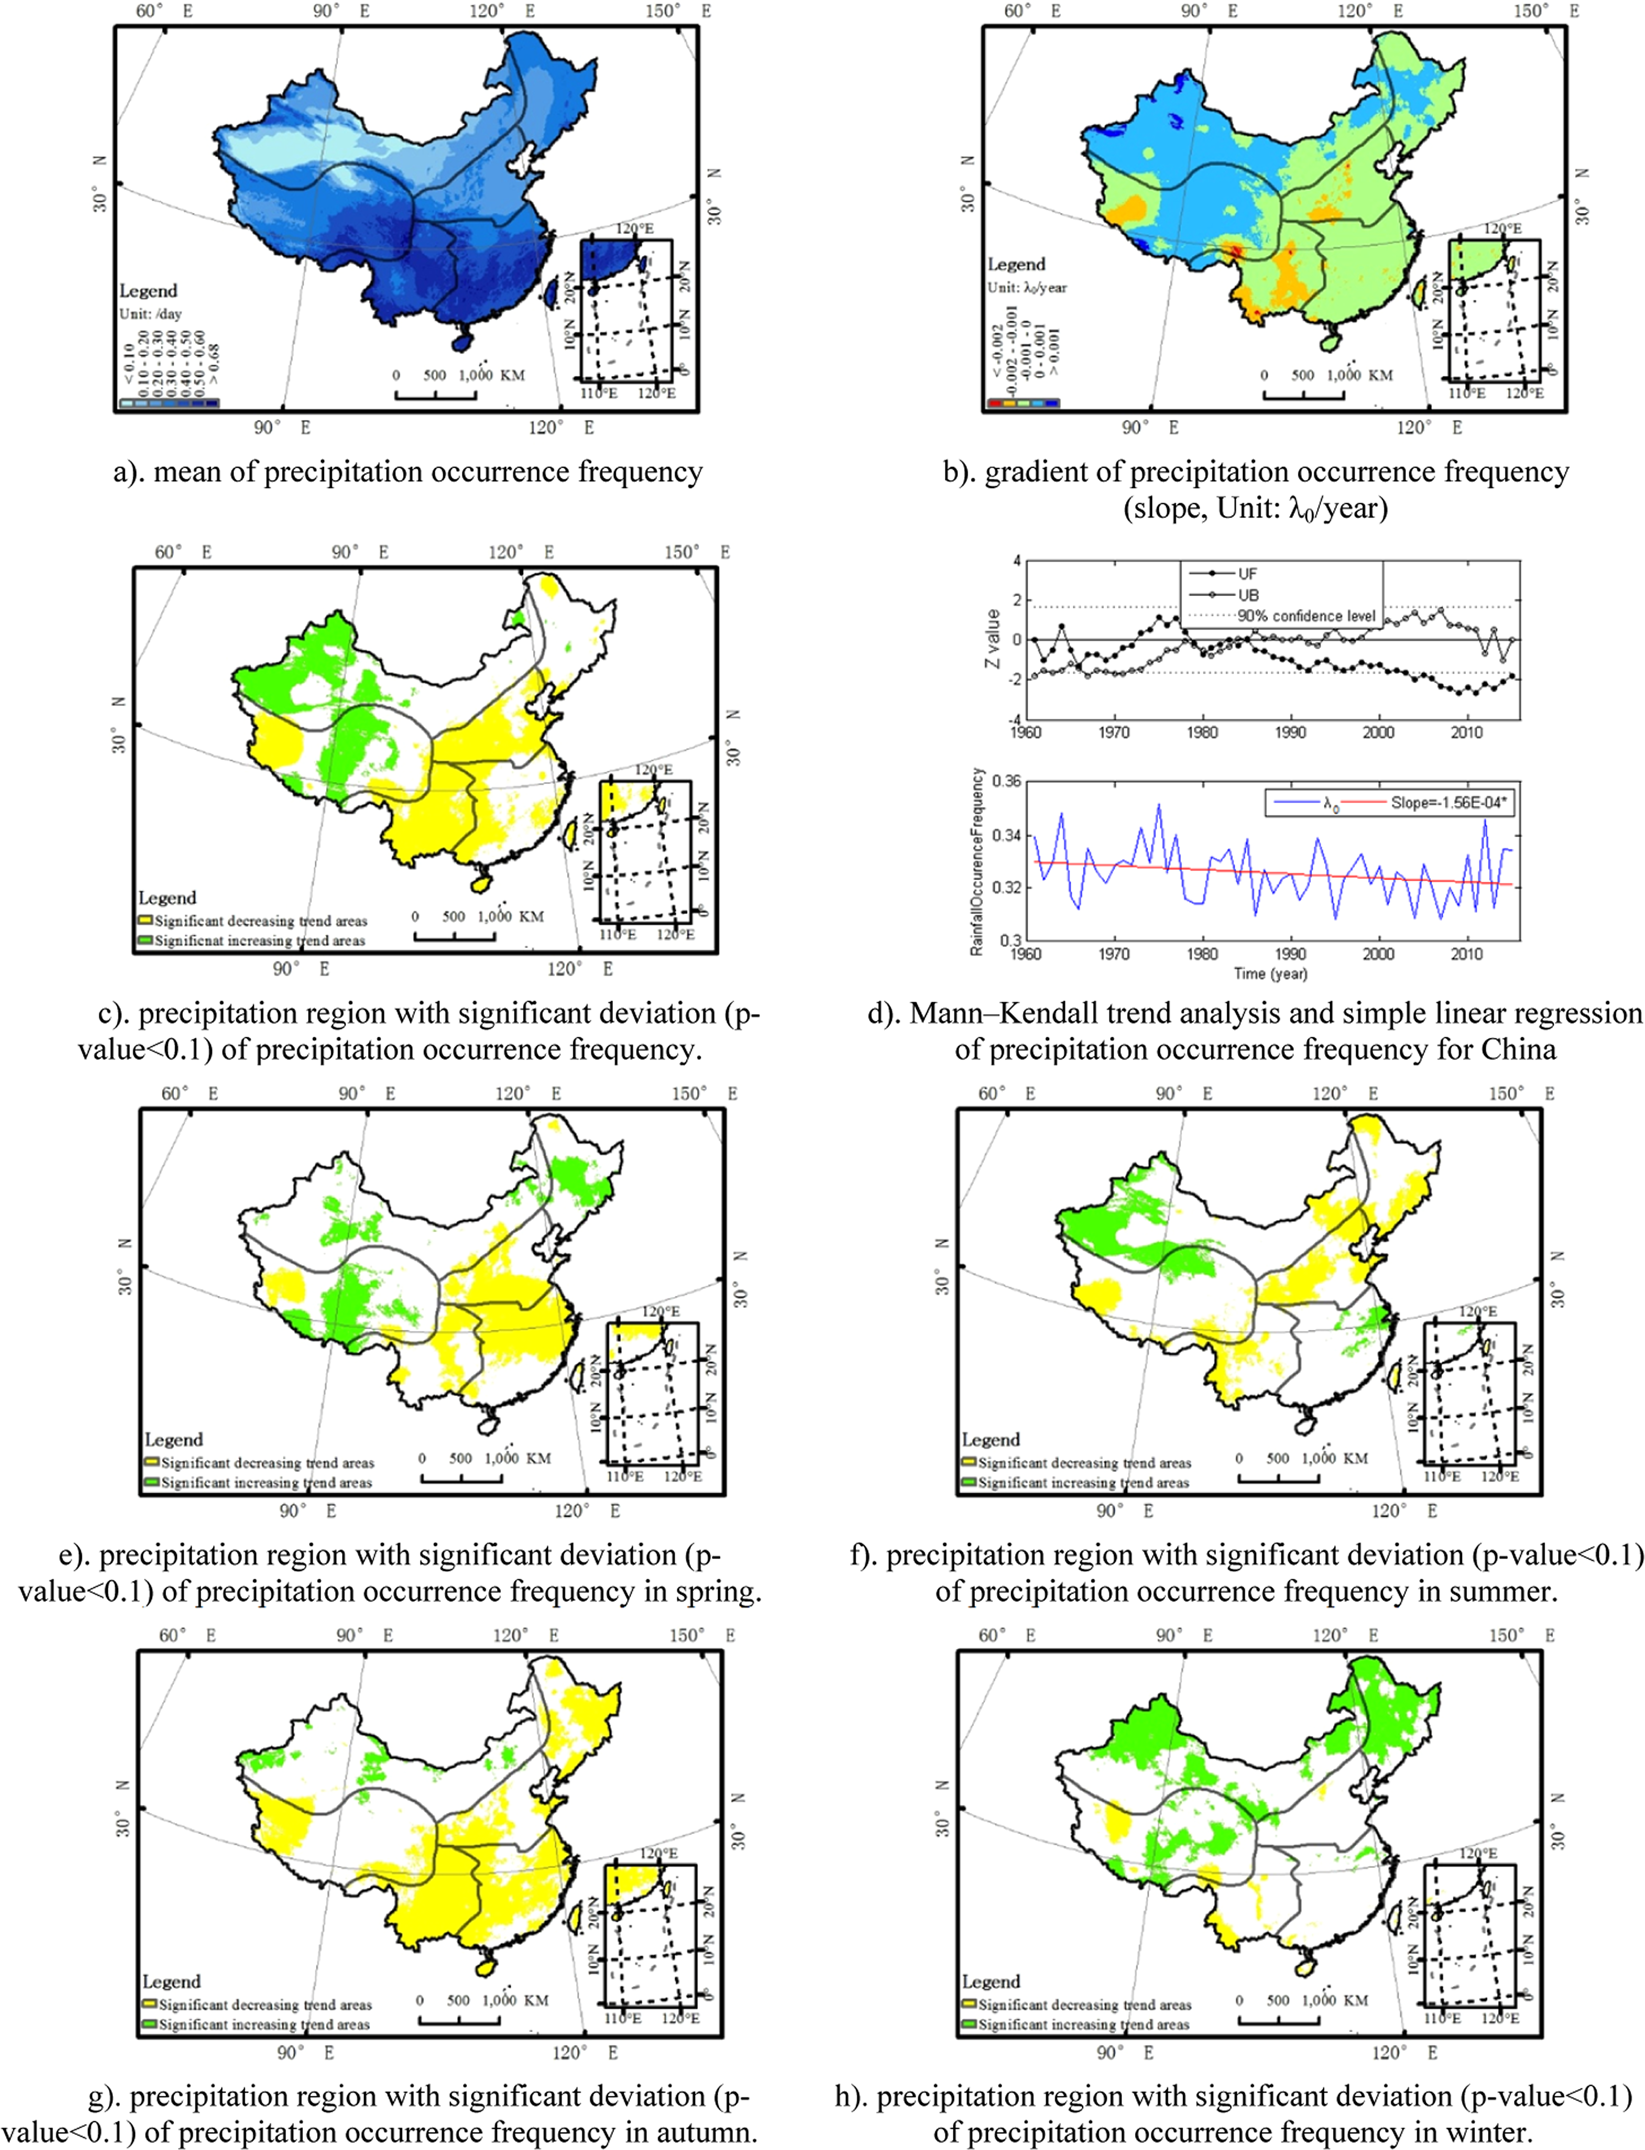 (PDF) Long-term spatial-temporal trends and variability of rainfall over  Eastern and Southern Africa